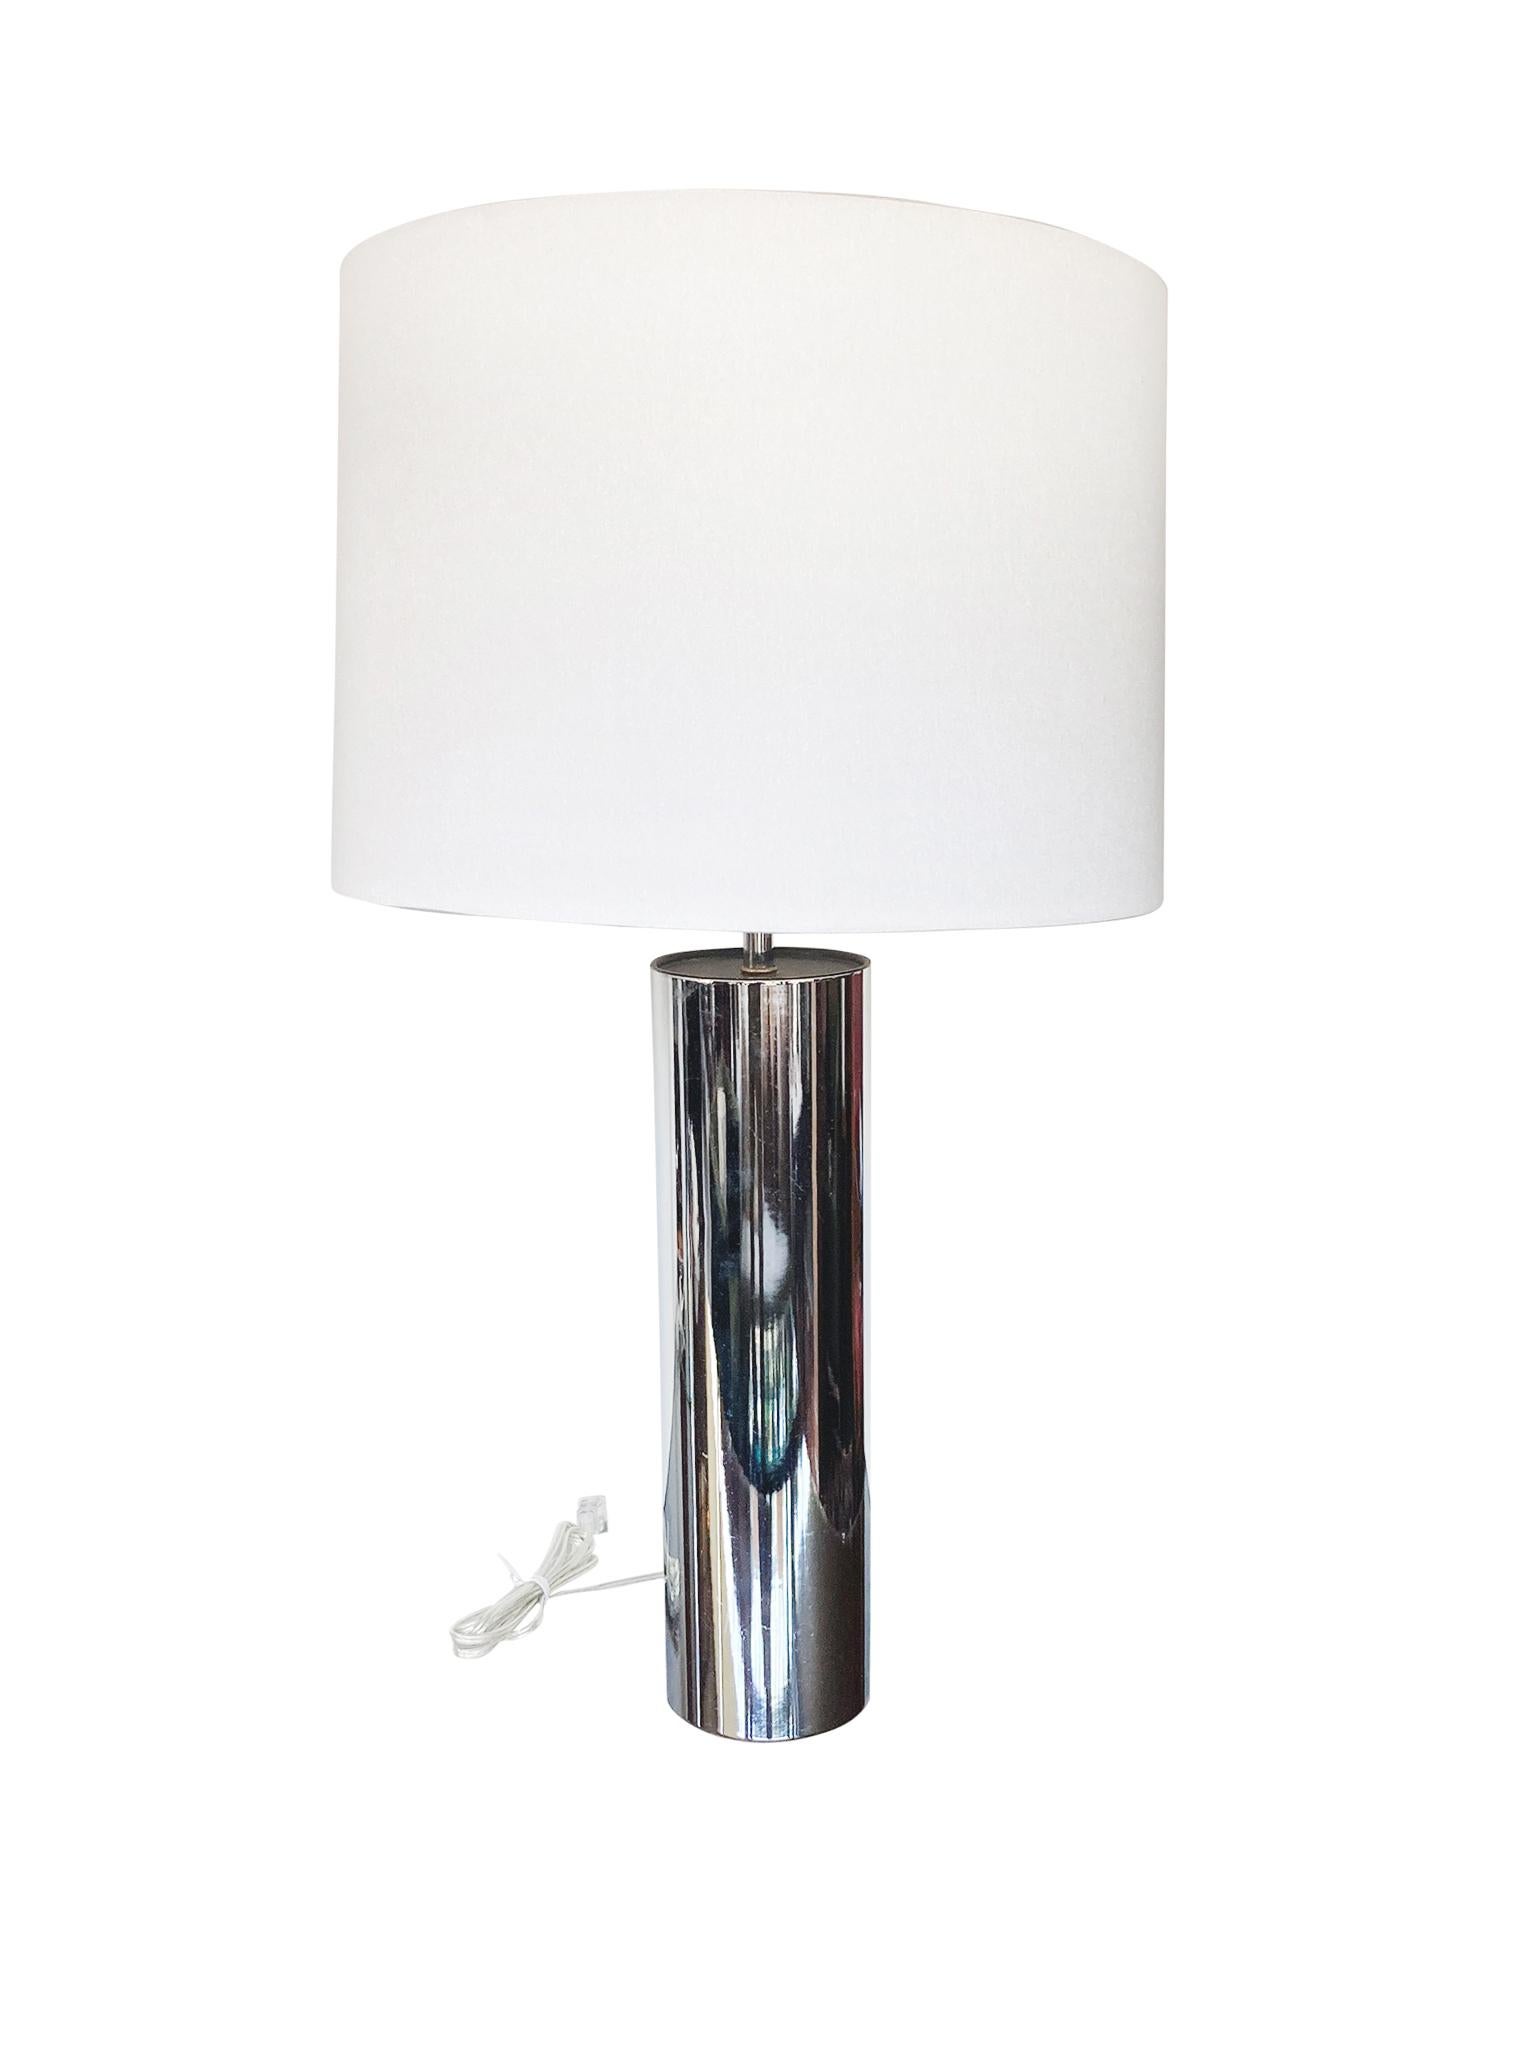 Silk Pair of 1970s Chrome Cylinder Table Lamps Attributed to George Kovacs